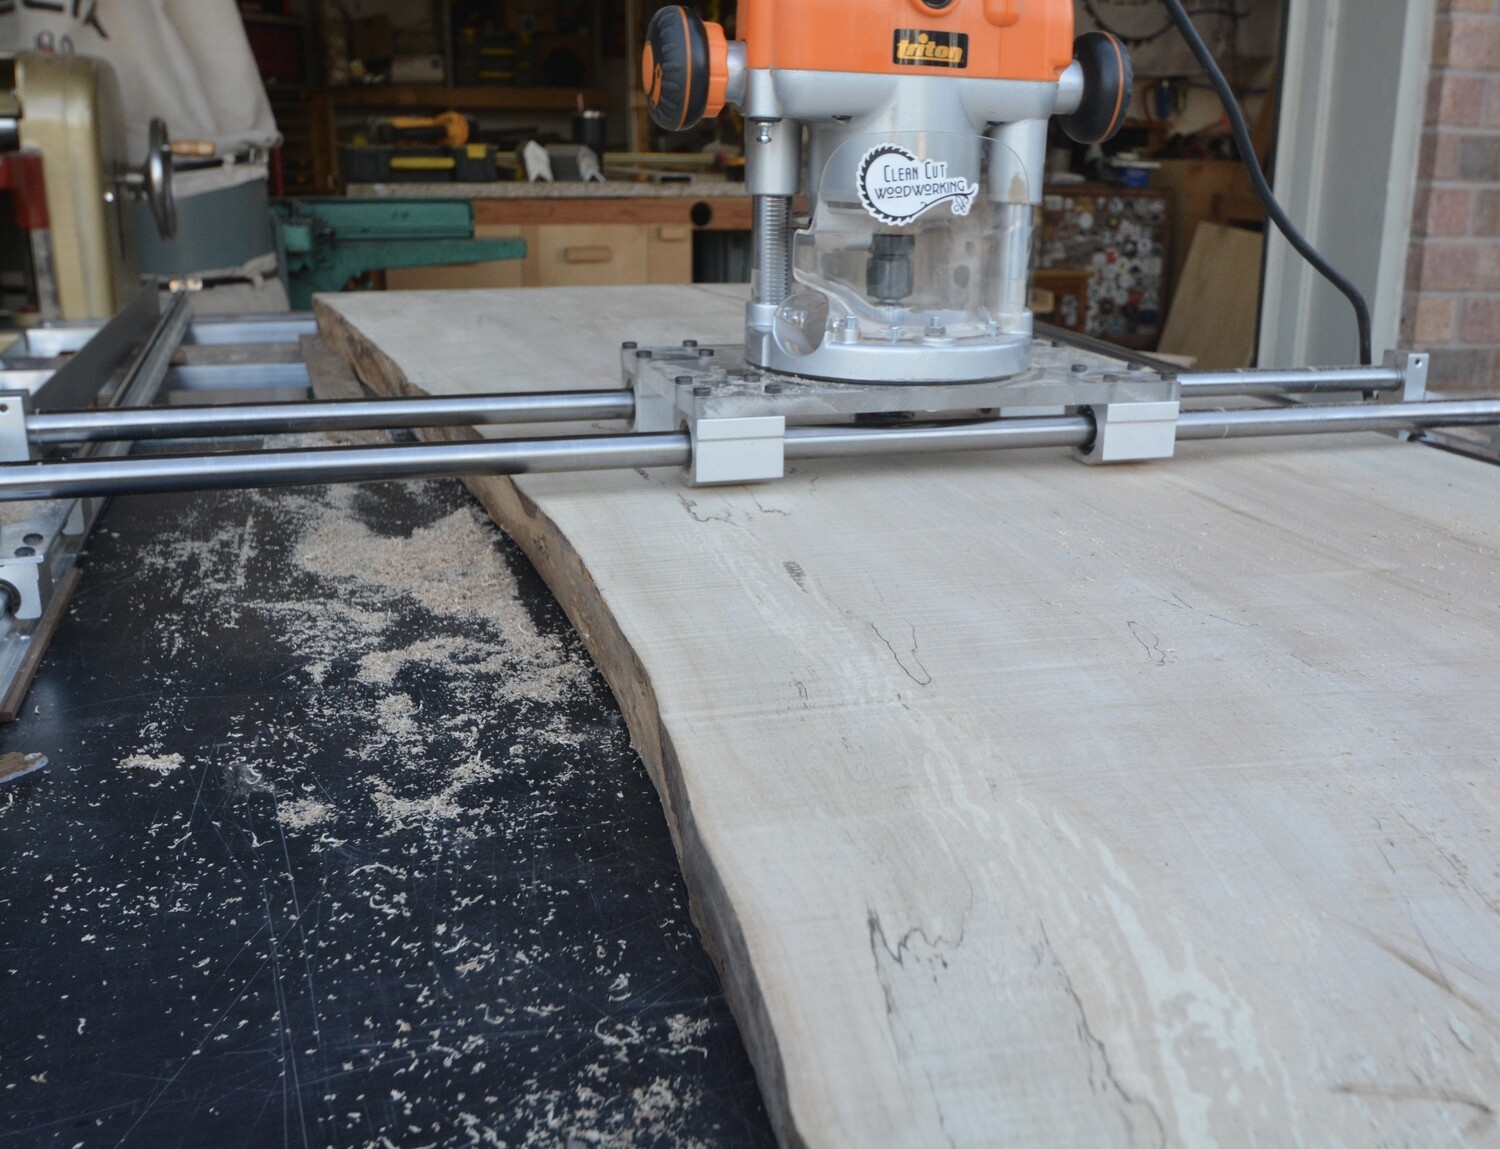 47"x8' Woodworking Router Sled